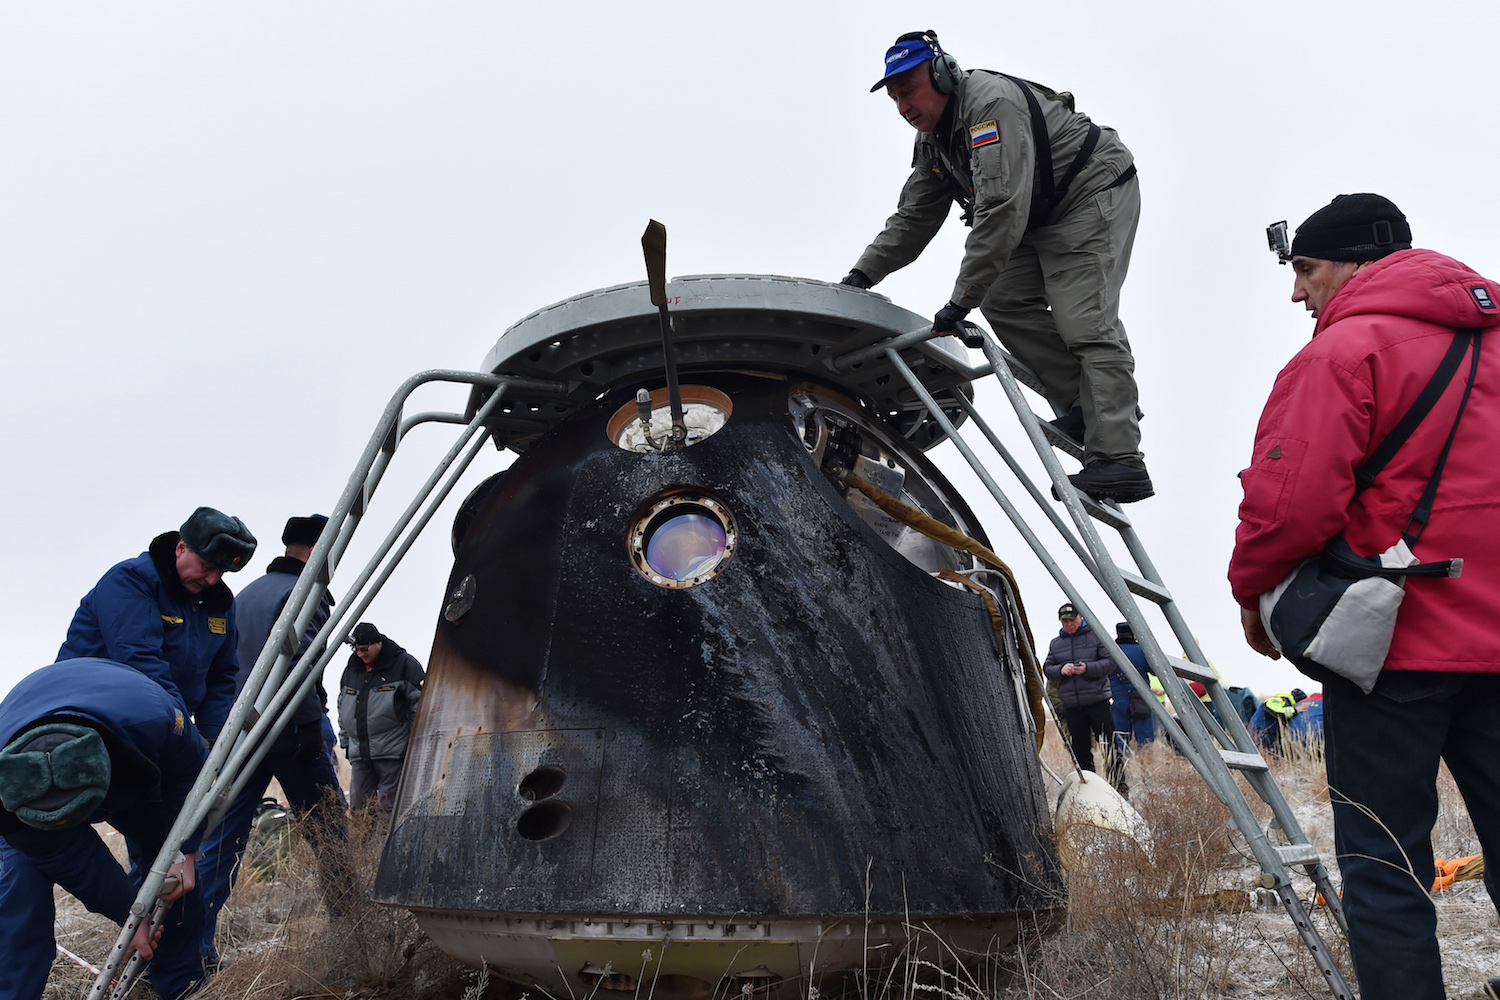 A search and rescue team works at the site of landing of the Soyuz TMA-18M space capsule carrying the International Space Station (ISS) crew of US astronaut Scott Kelly and Russian cosmonauts Mikhail Kornienko and Sergey Volkov outside the town of Dzhezkazgan, Kazakhstan, on Wednesday, March 2, 2016. US astronaut Scott Kelly and Russian cosmonaut Mikhail Kornienko returned to Earth on March 2 after spending almost a year in space in a ground-breaking experiment foreshadowing a potential manned mission to Mars. (Krill Kudryavtsev/Pool photo via AP)